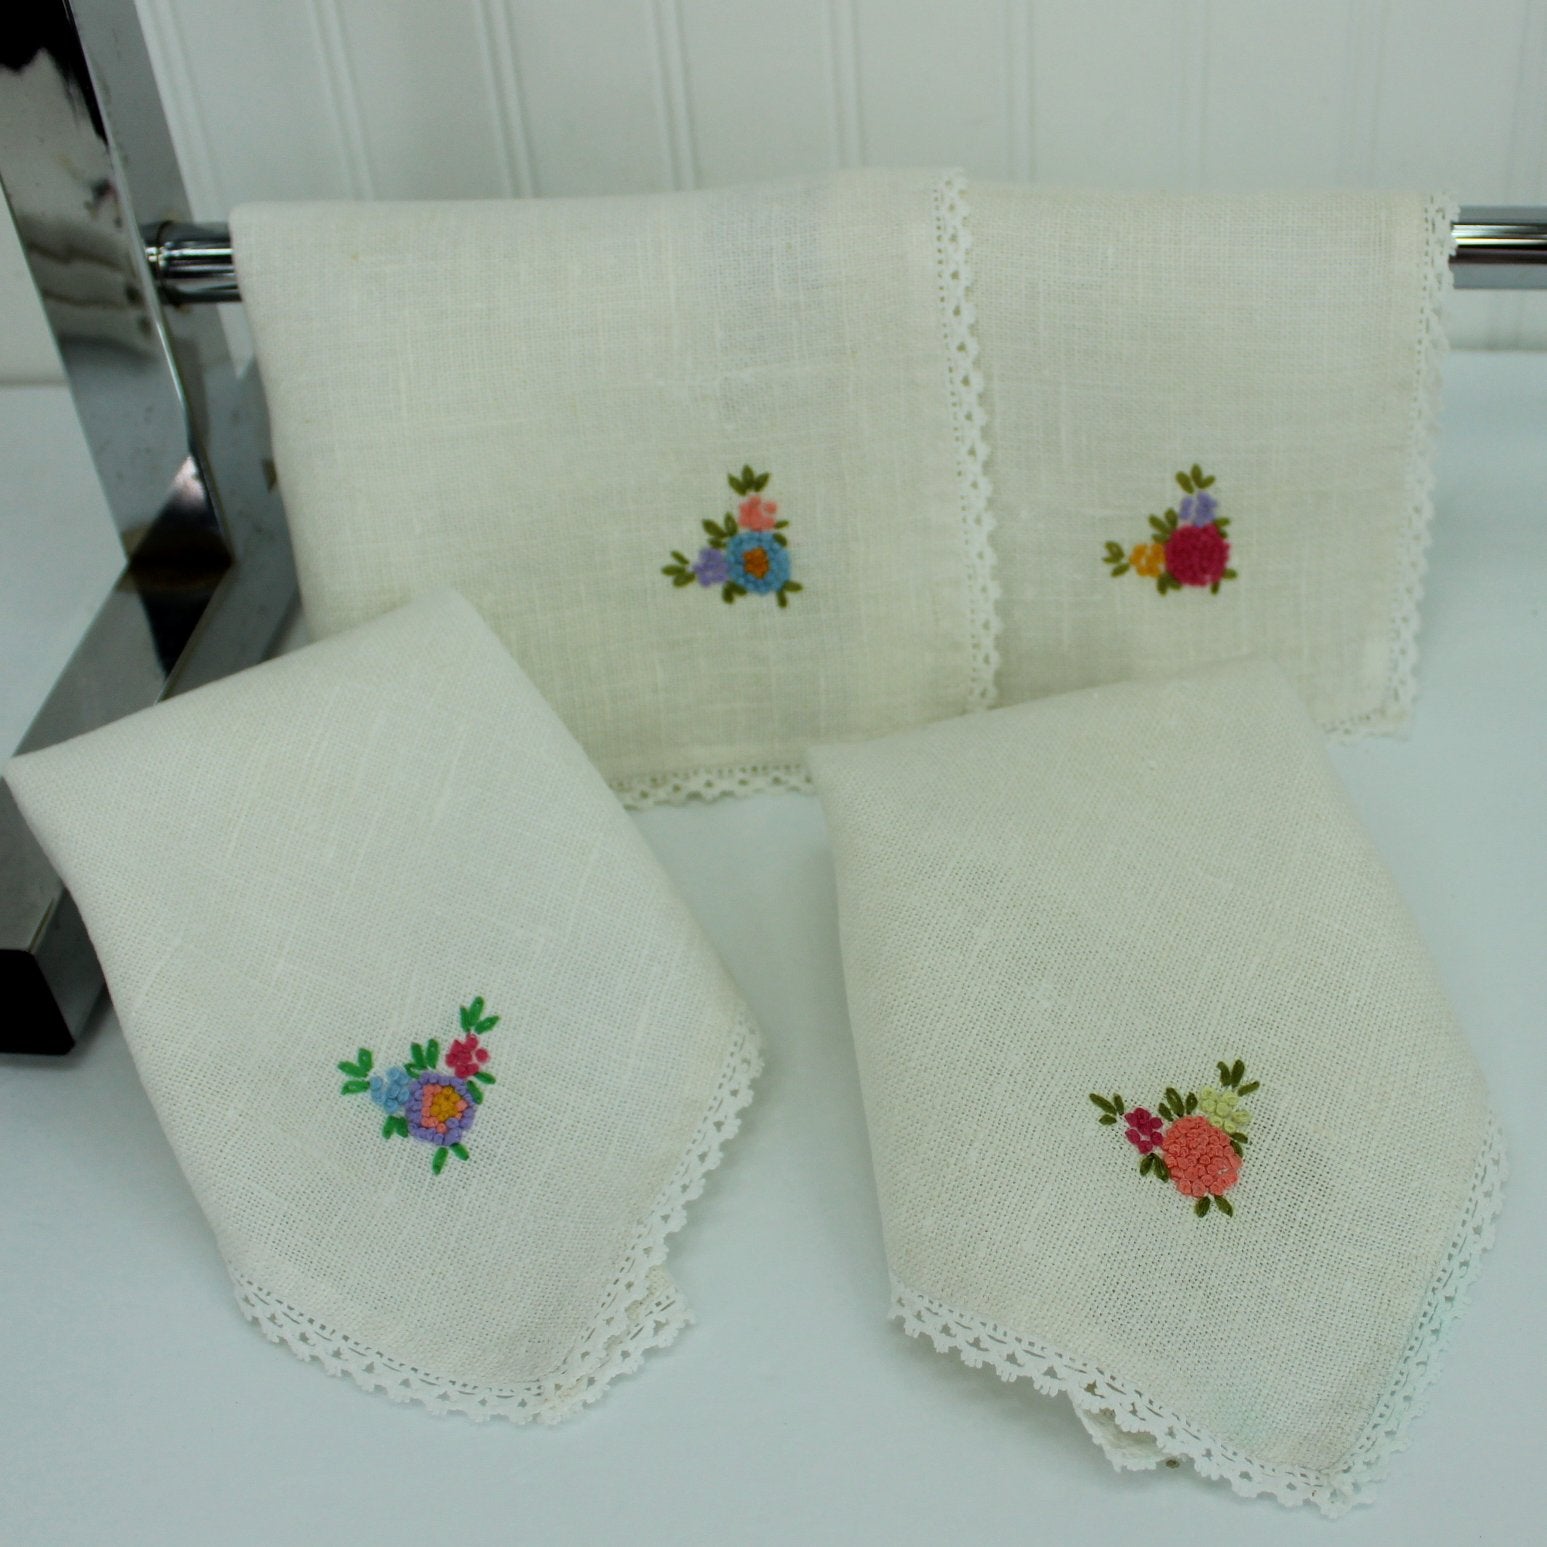 Collection 7 Vintage Linen Hand Towels Exquisite Embroidery 1940s Collectible DIY Repurpose 4 floral cornrs